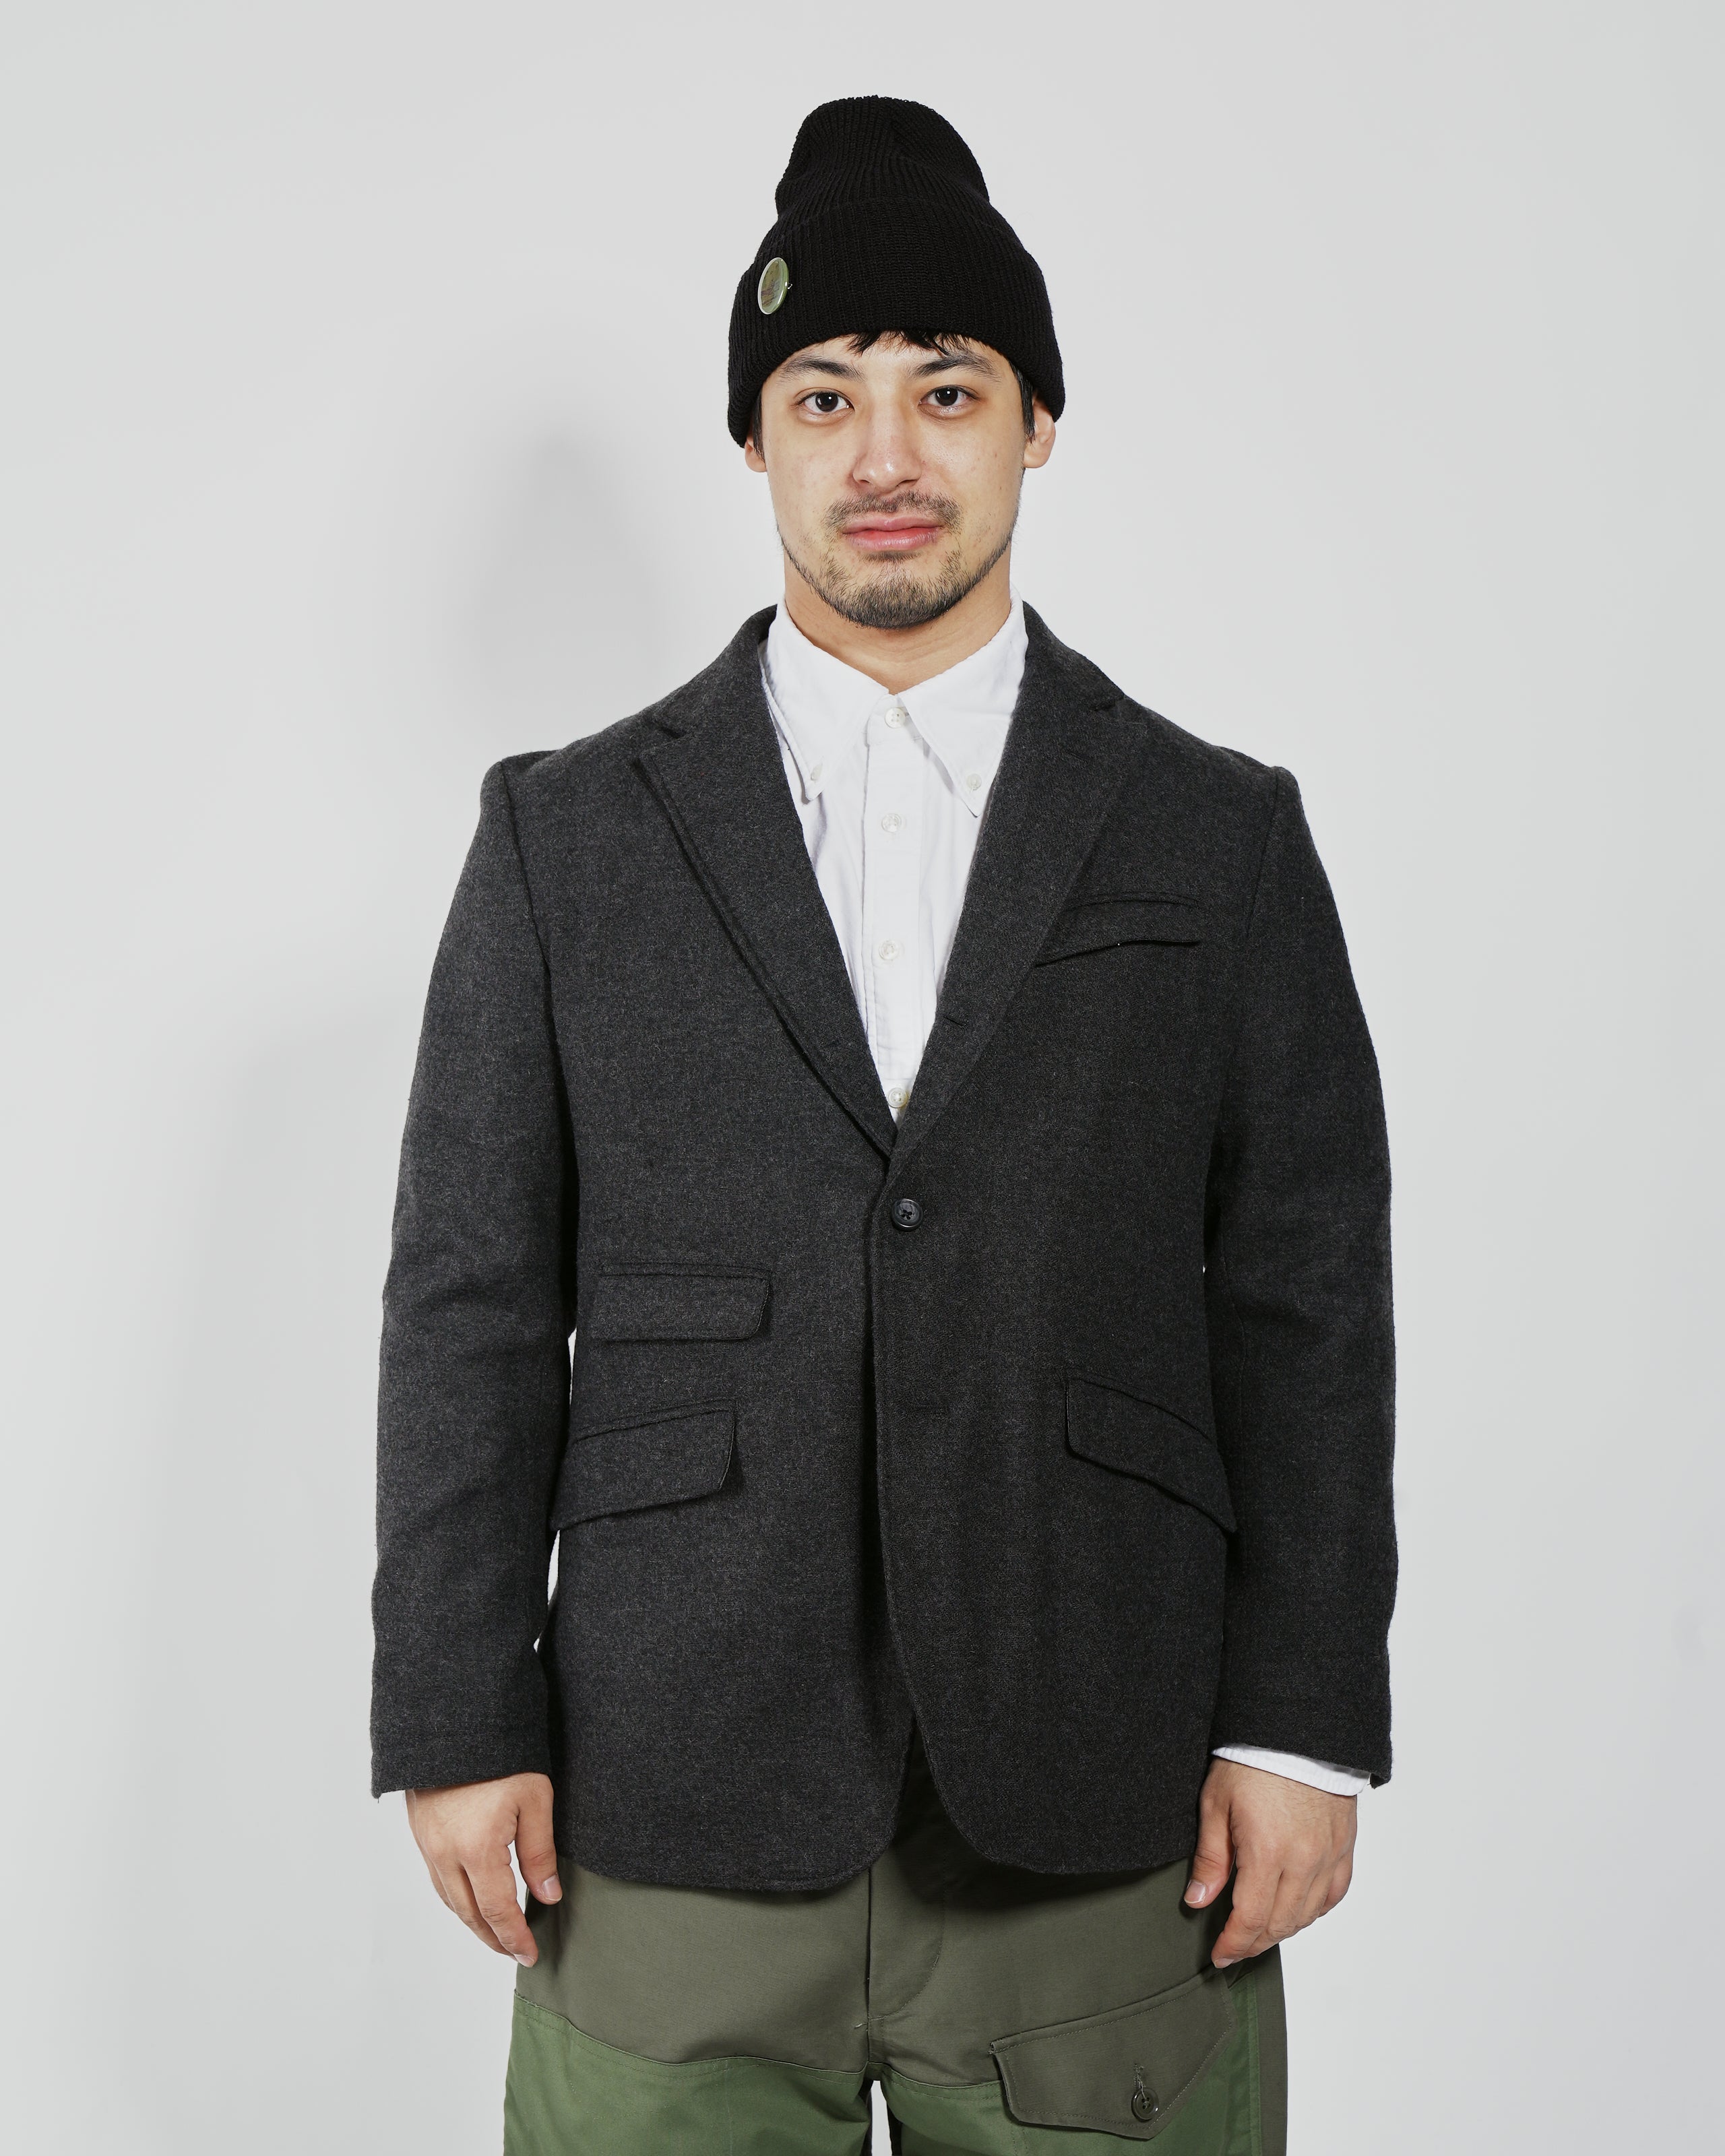 Andover Jacket - Grey Solid Poly Wool Flannel | Nepenthes New York